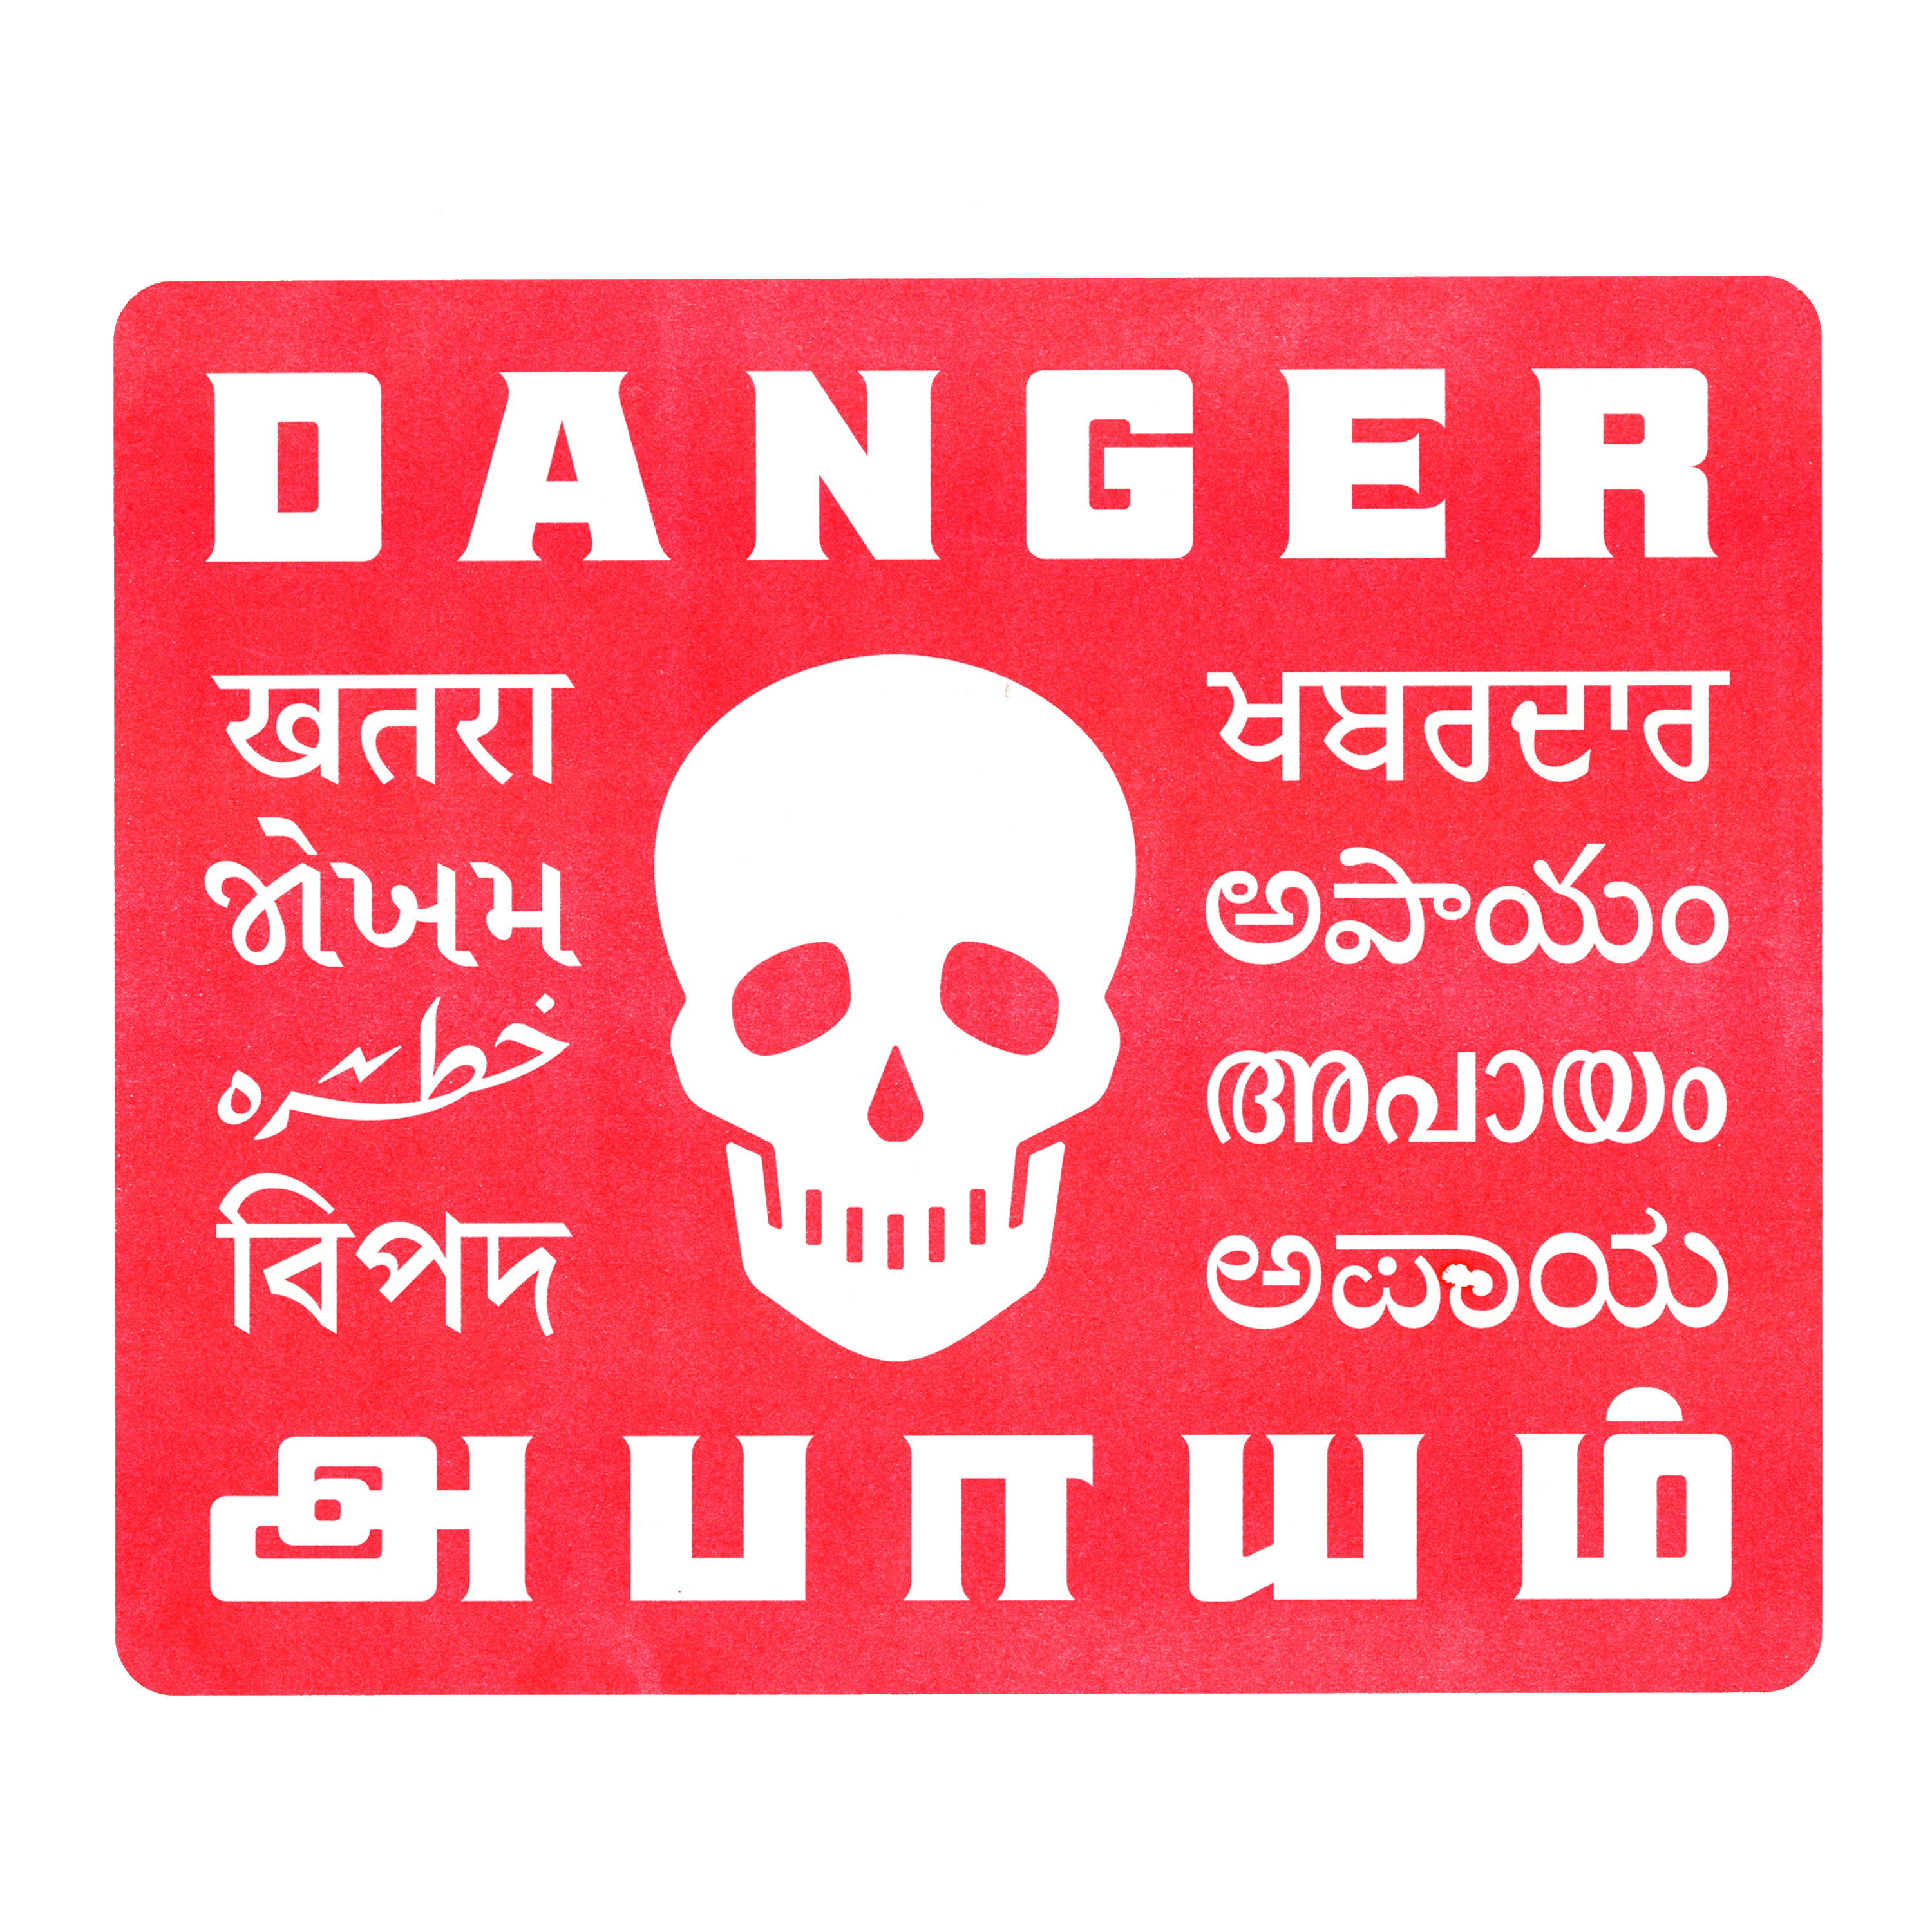 Hindi text in white, on a red background with a white skull in the middle.